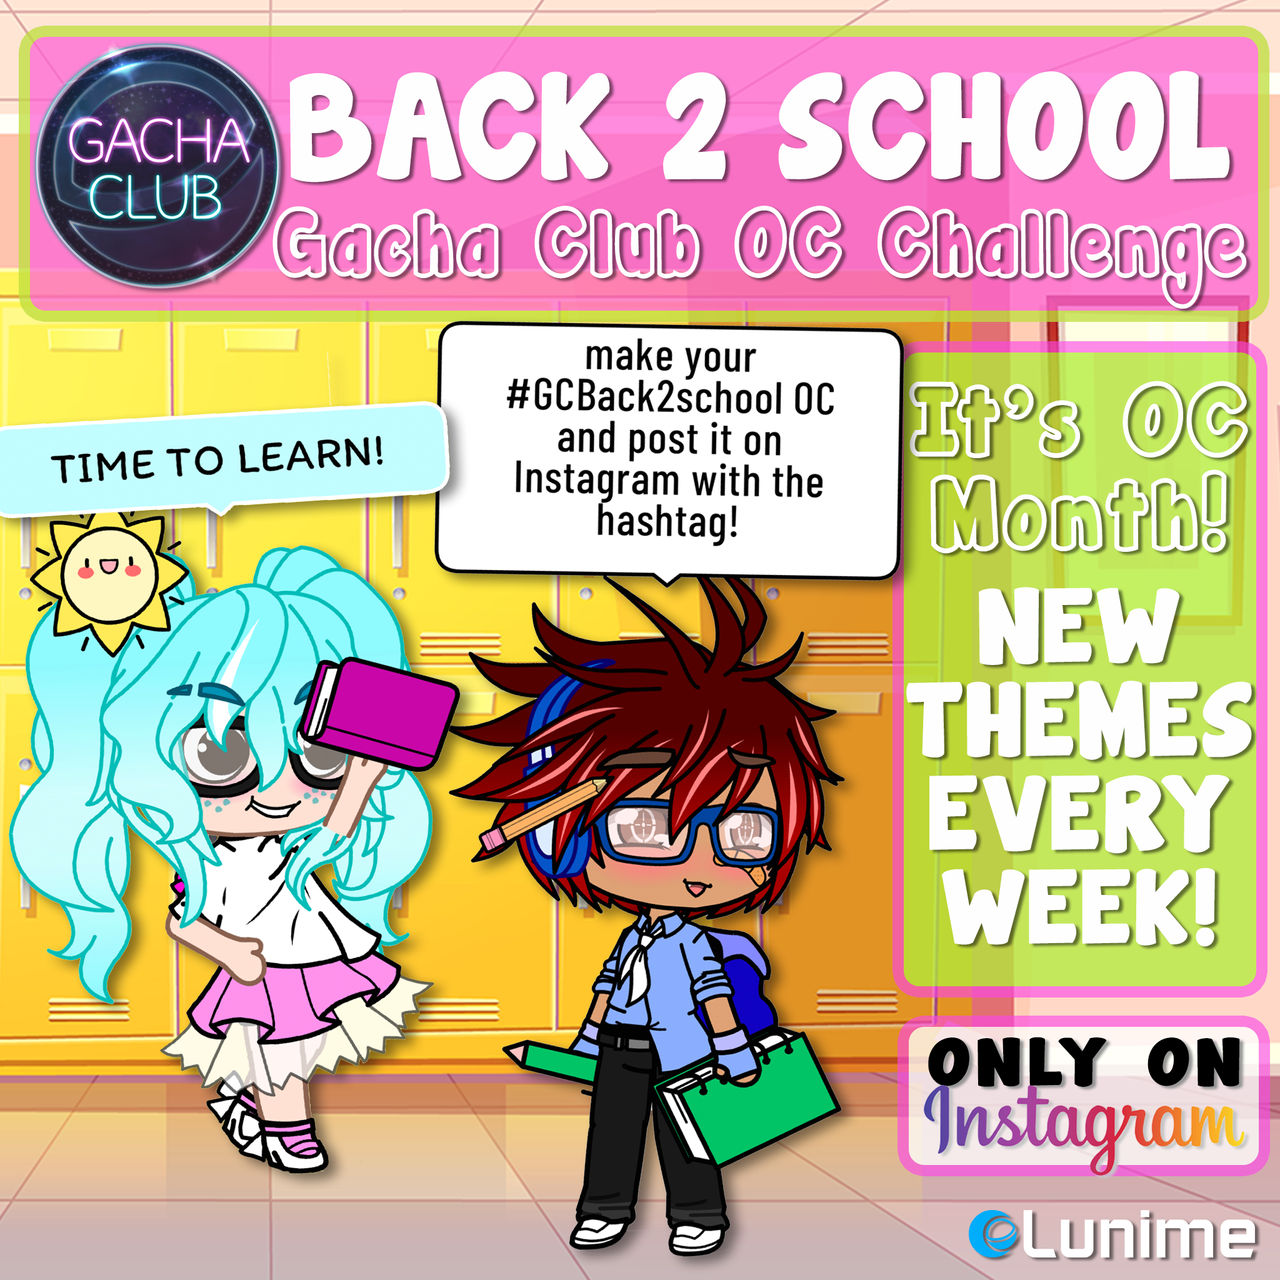 Gacha Club Available Now! by LunimeGames on DeviantArt